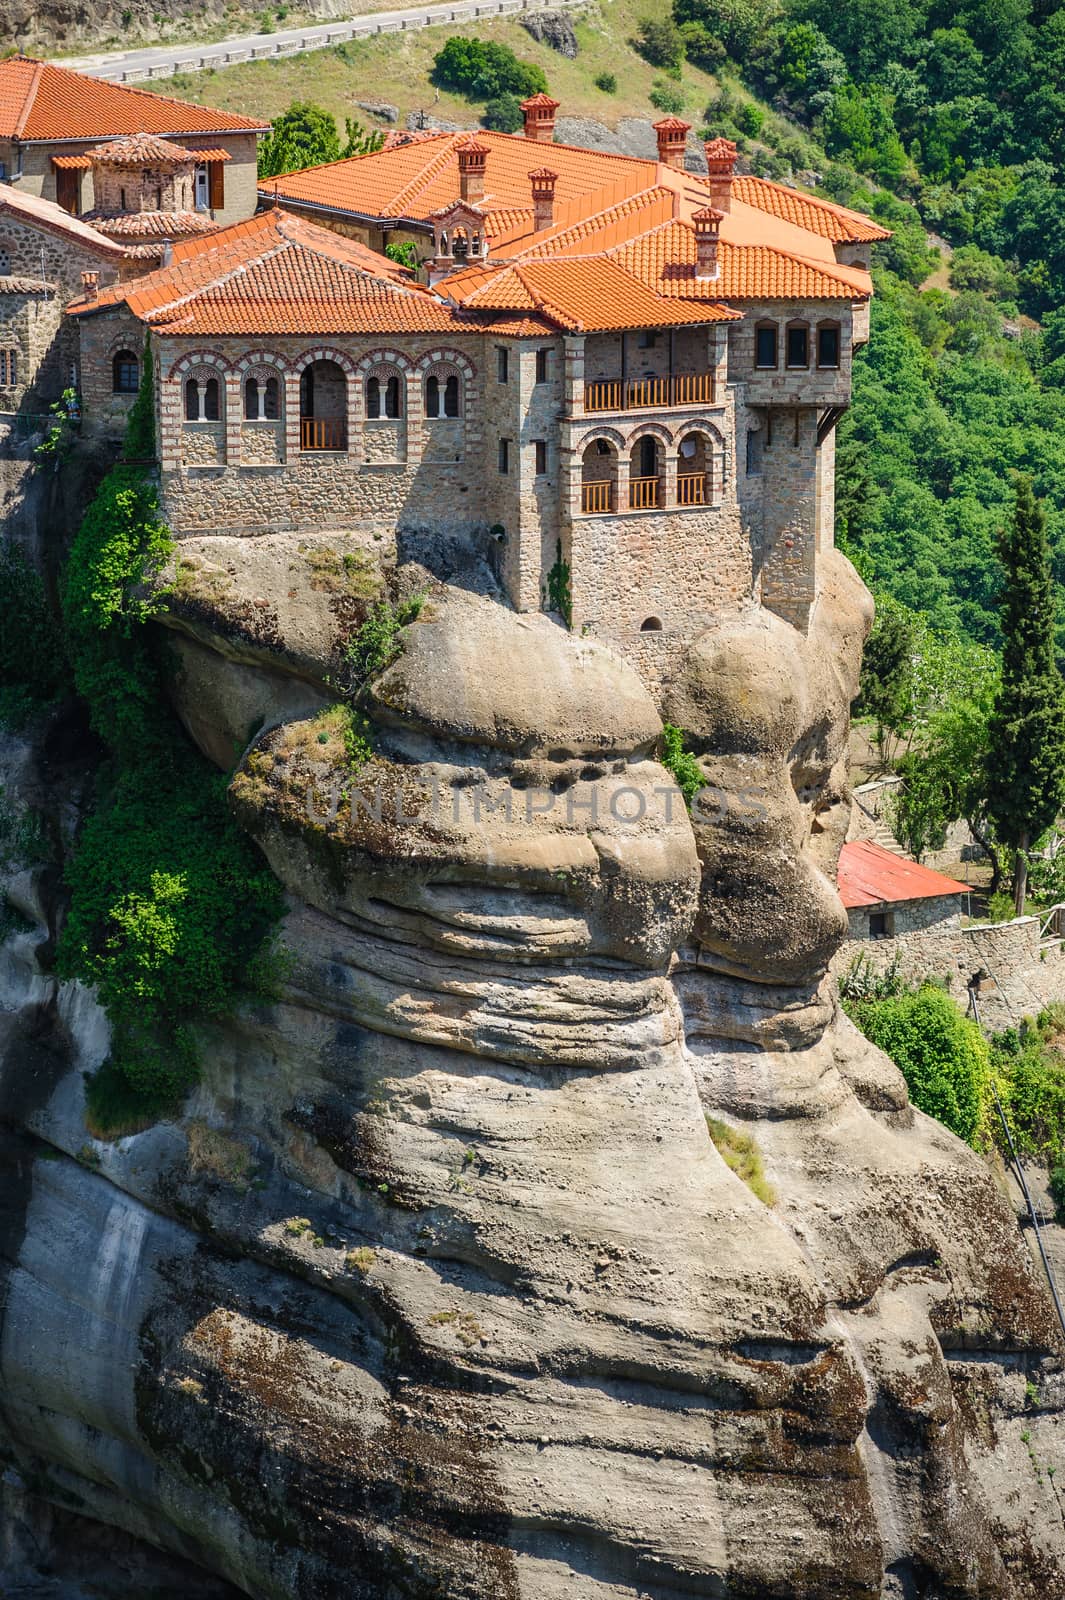 The holly monastery of Varlaam on the top of rock, Meteora, Greece